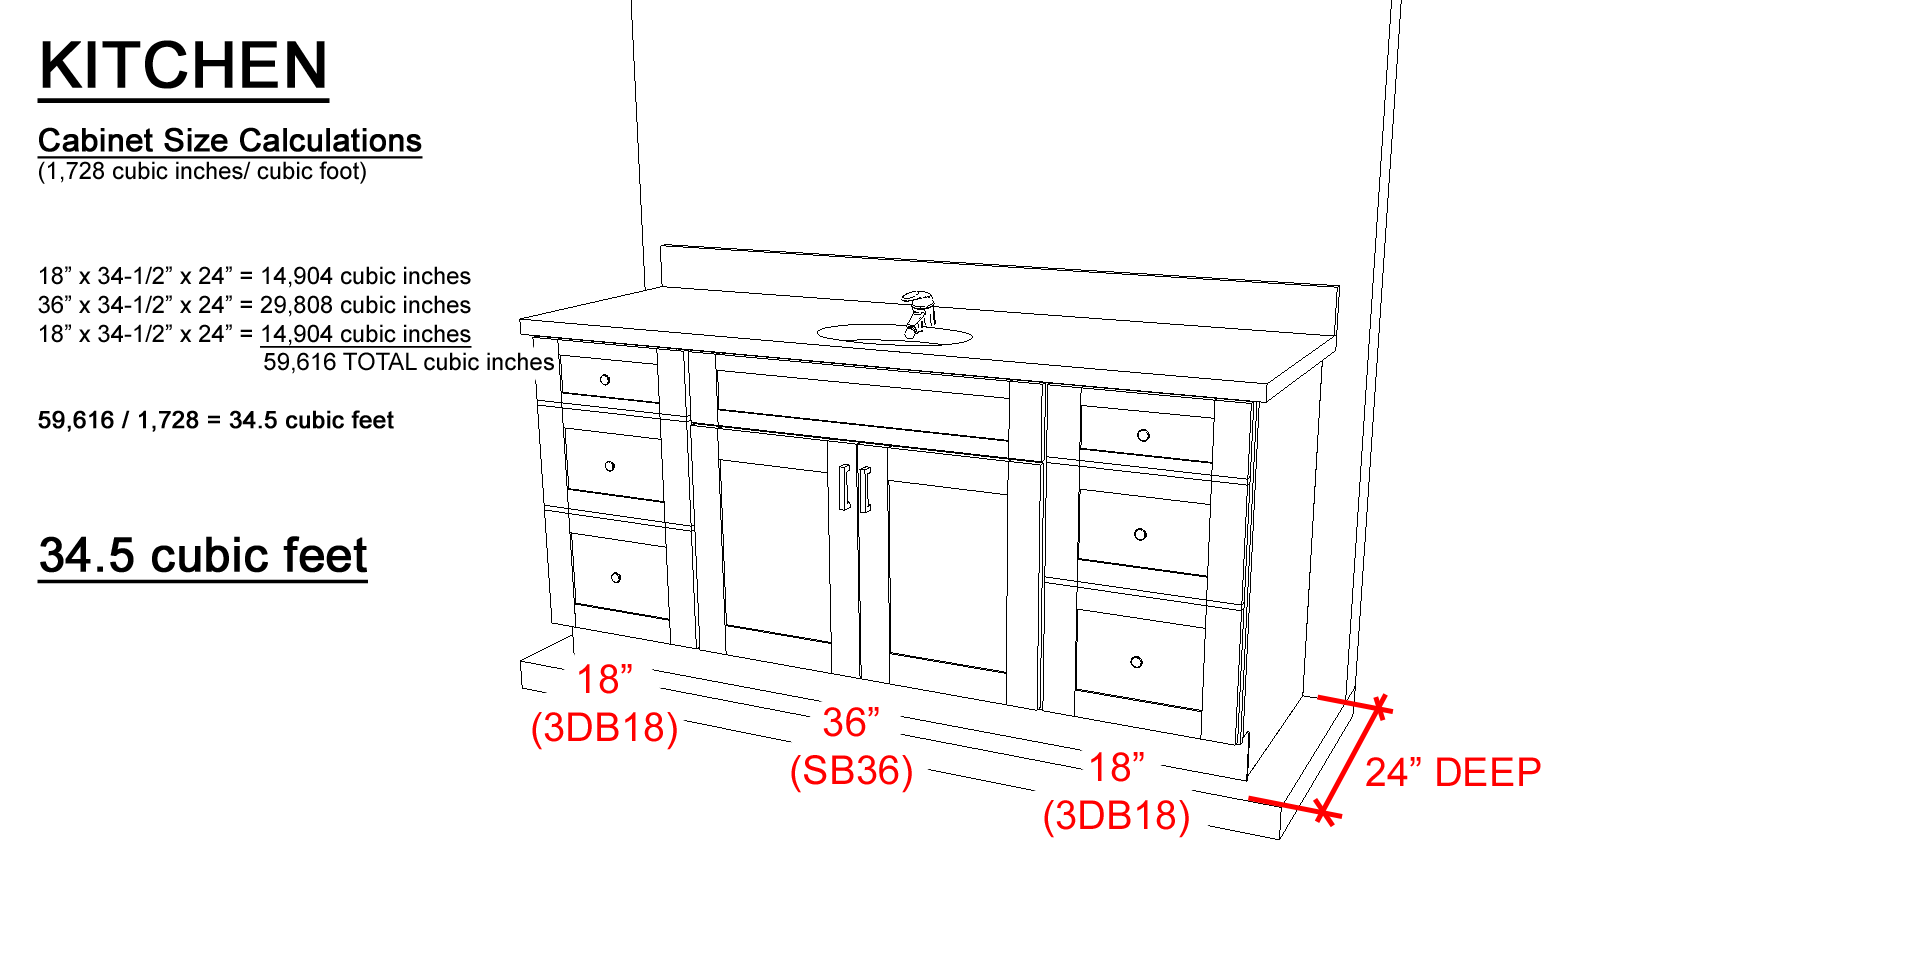 Vanity Pricing Analysis Why Are Vanity Cabinets More Expensive